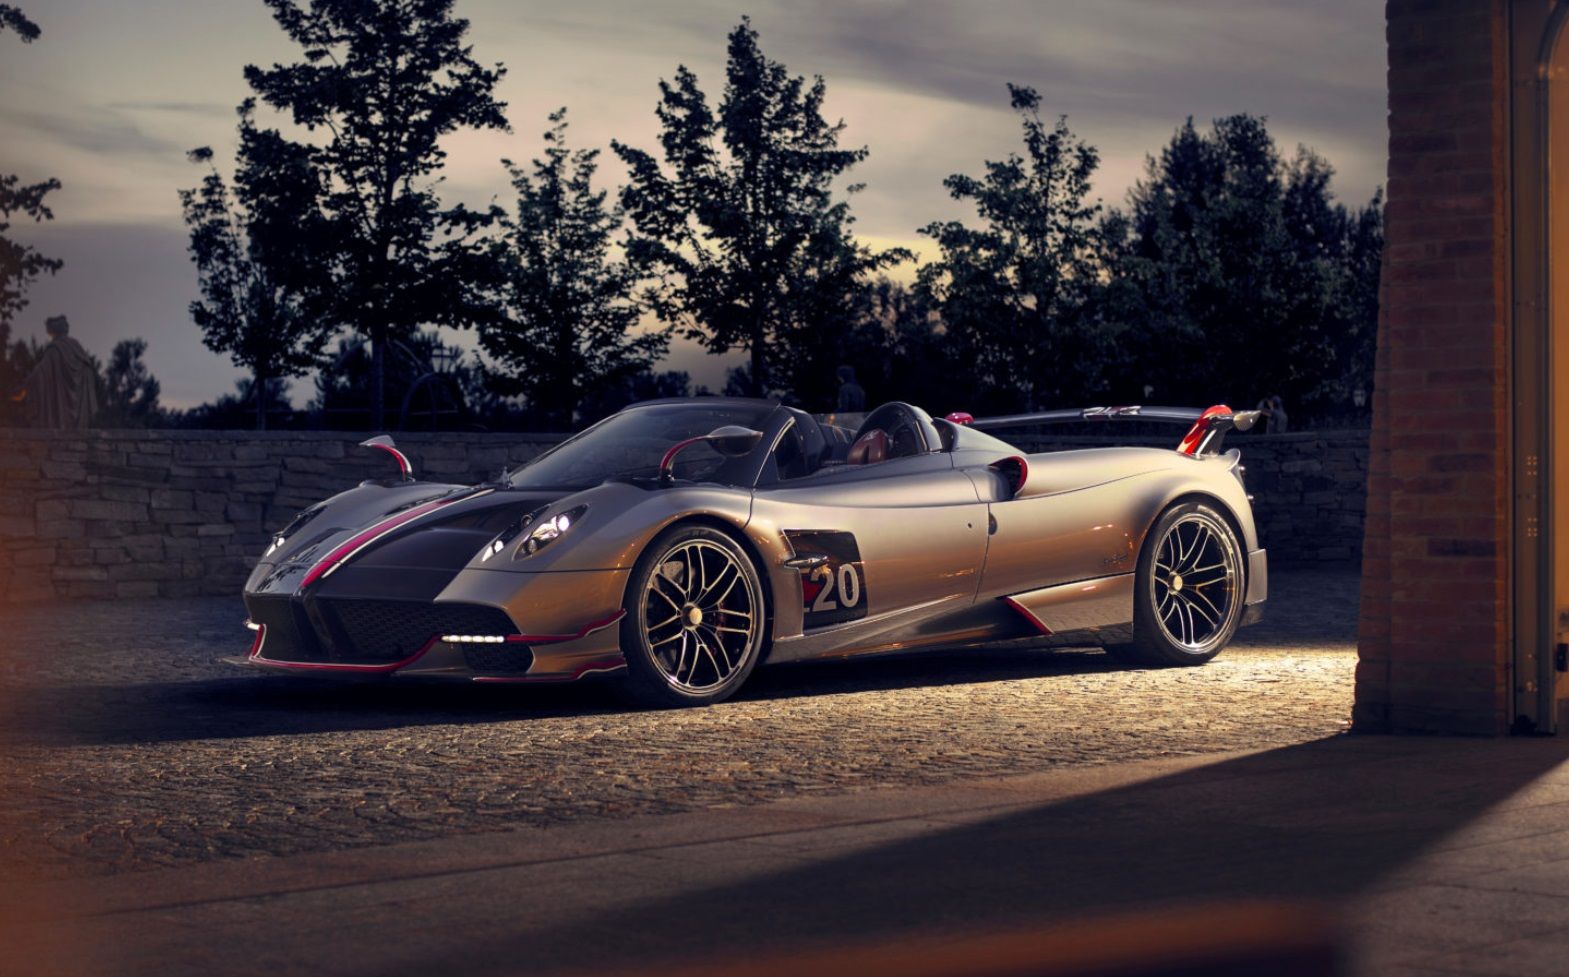 The Pagani Huayra Roadster BC photographed during the night.